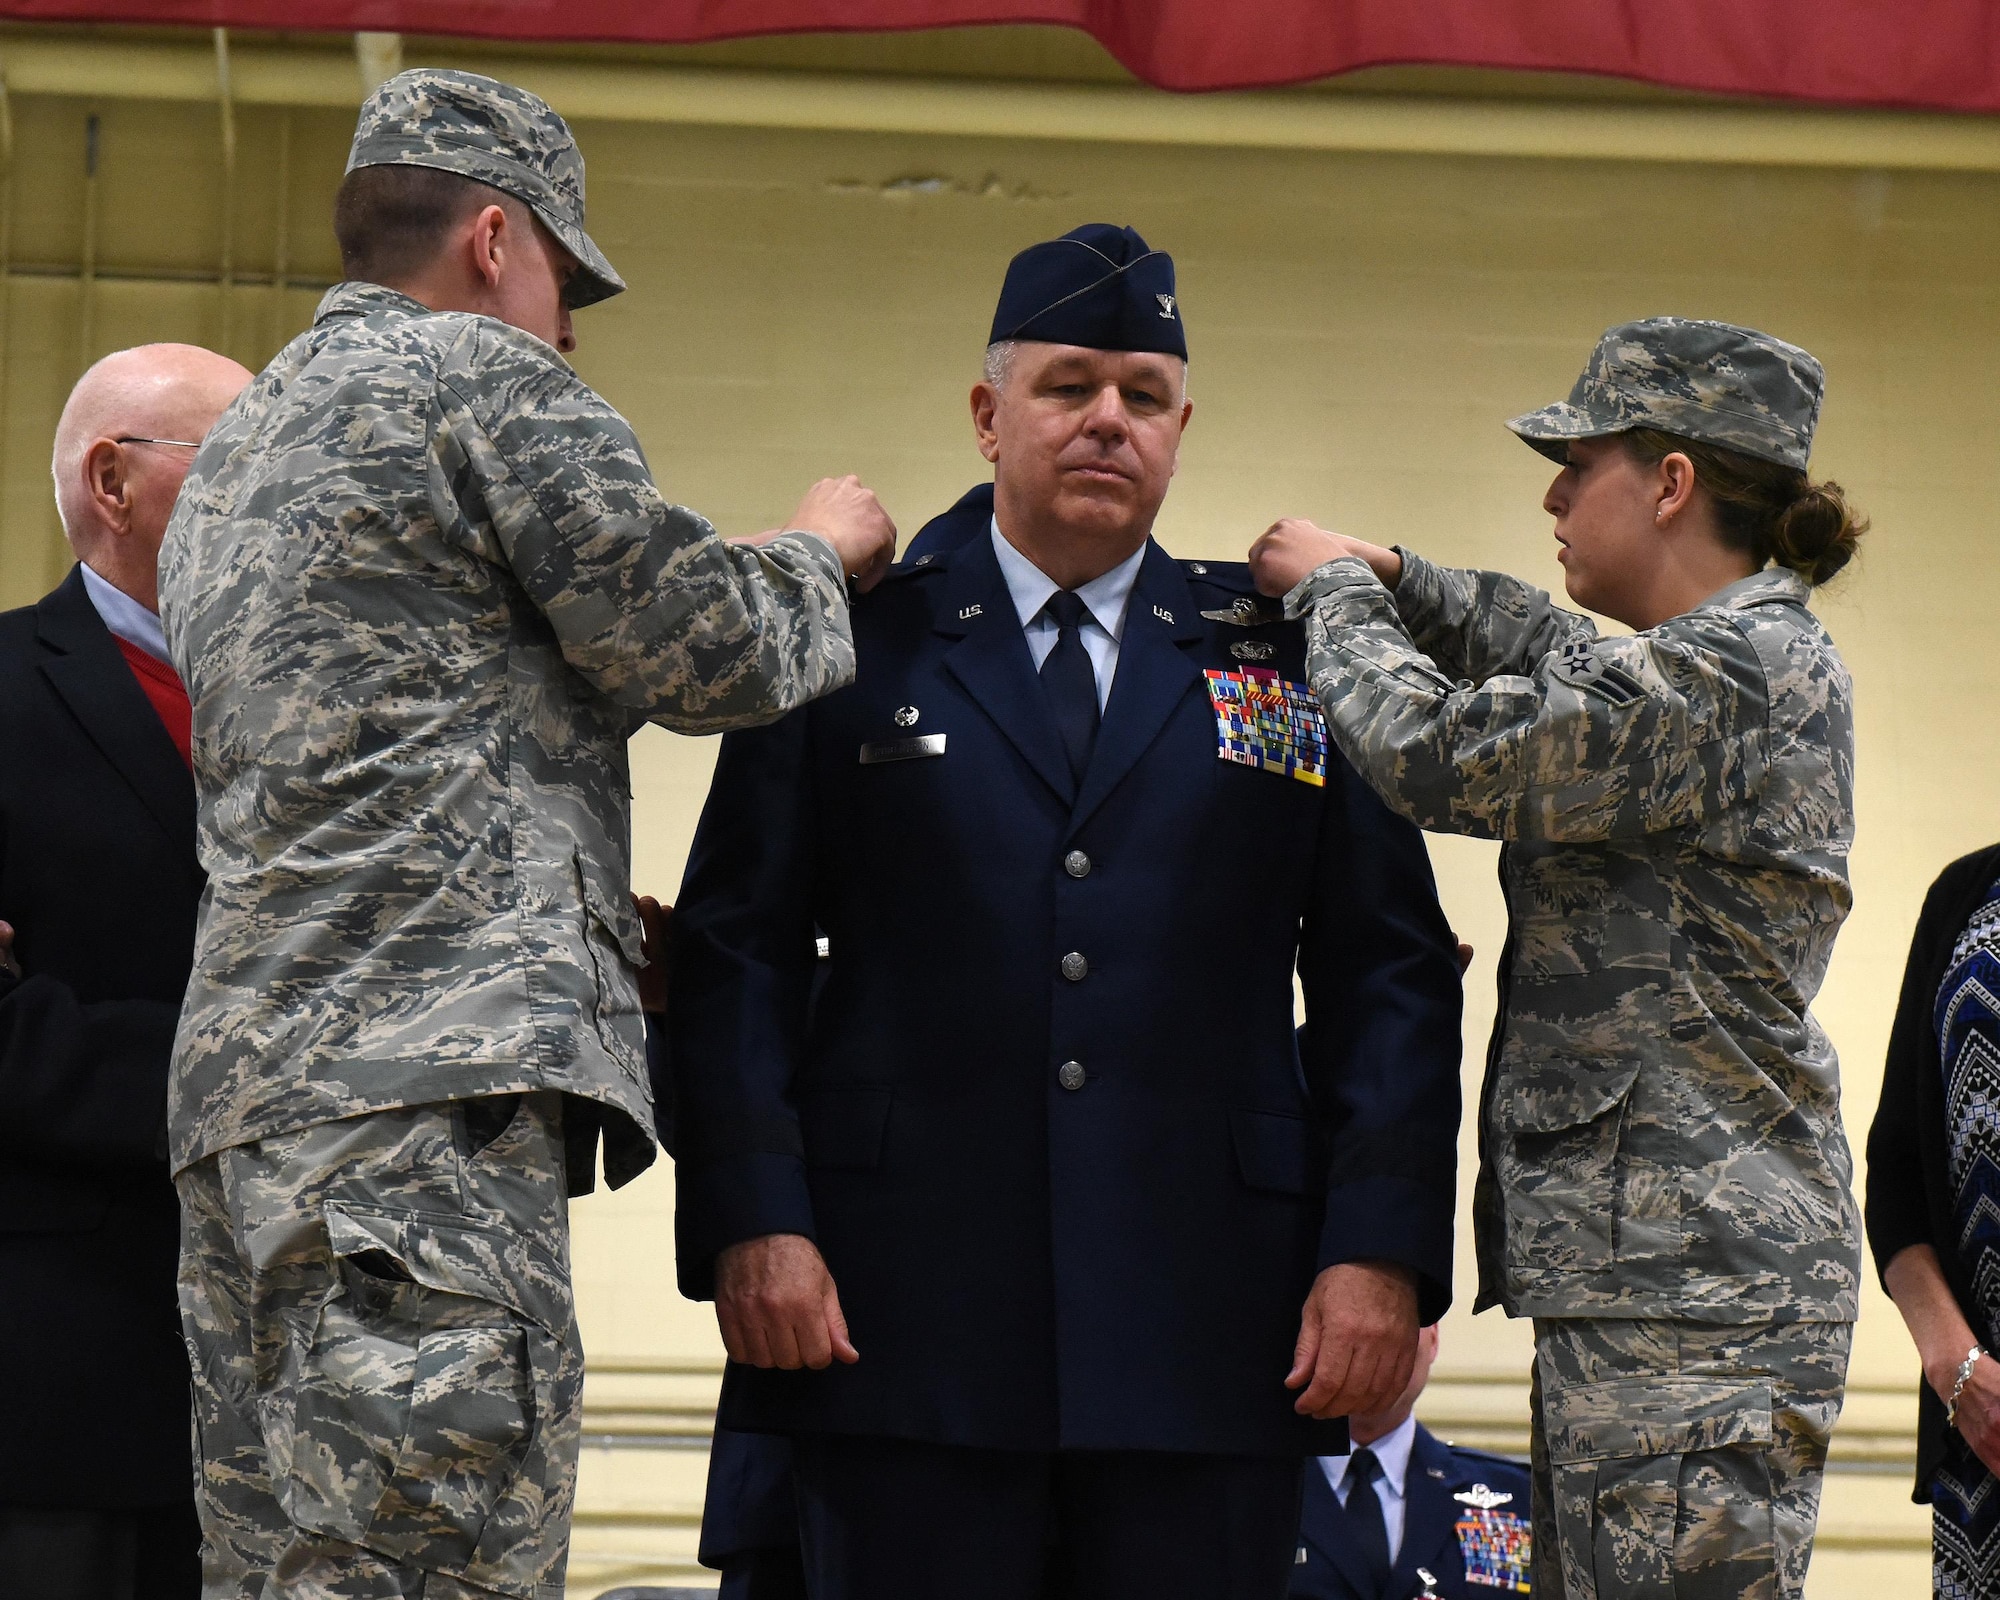 U.S. Air Force Brig. Gen. William P. Robertson has his son, 2nd Lt. James Robertson and his daughter, Airman 1st Class Elizabeth Robertson, remove the colonel devices on his service dress coat and replace them with brigadier general devices during Robertson's promotion ceremony in Peoria, Ill. Nov. 4, 2017.  With the promotion, Robertson becomes the chief of staff for the Illinois Air National Guard, after serving 13 years as the commander of the 182nd Airlift Wing. (U.S. Air National Guard photo by Master Sgt. Todd Pendleton)